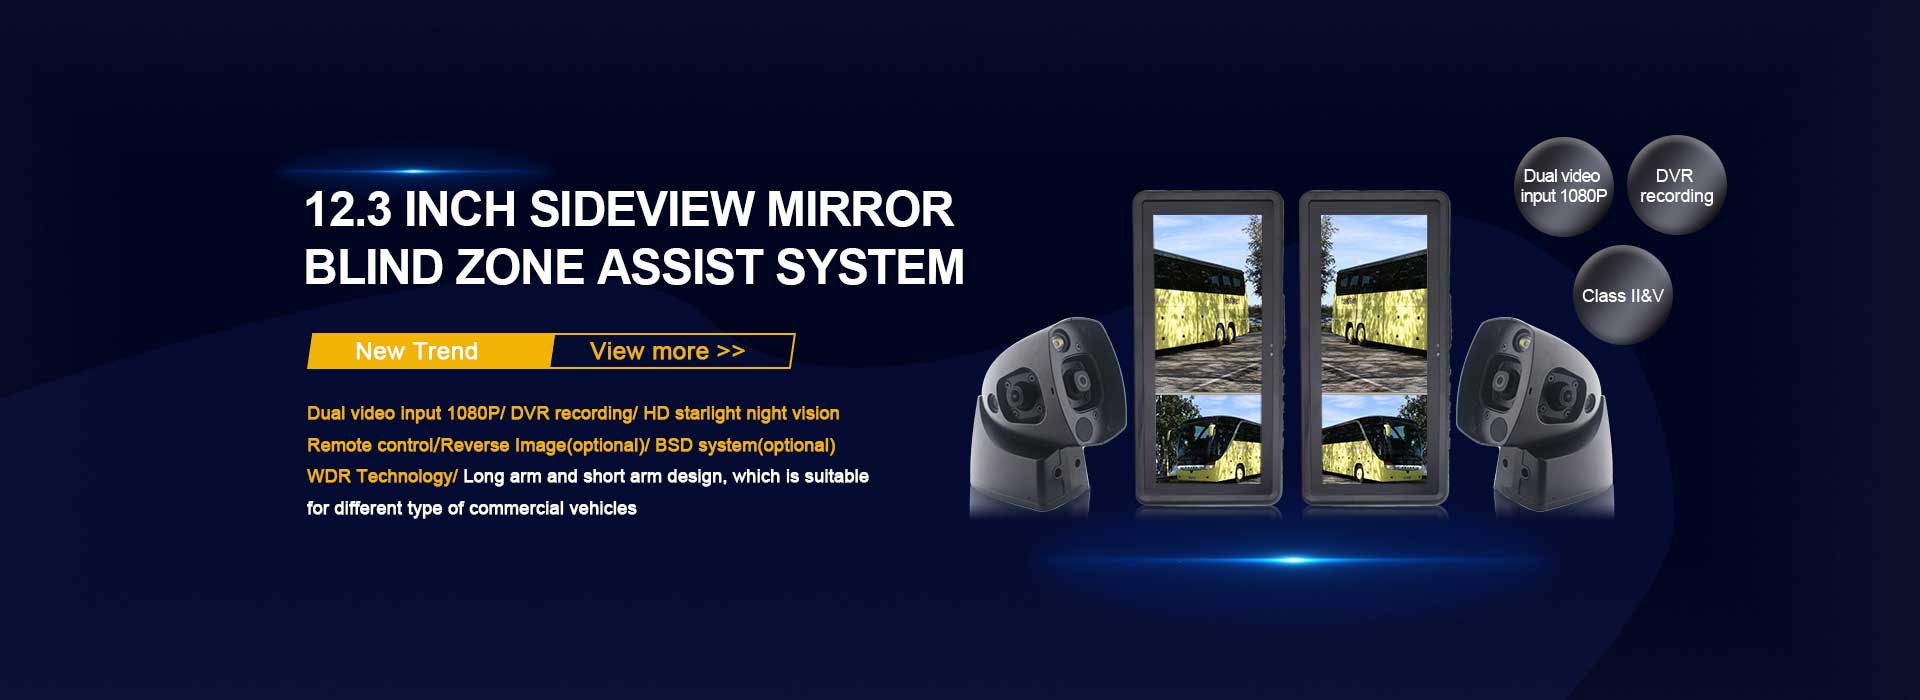 12.3inch Sideview Mirror Blind Zone Assist System